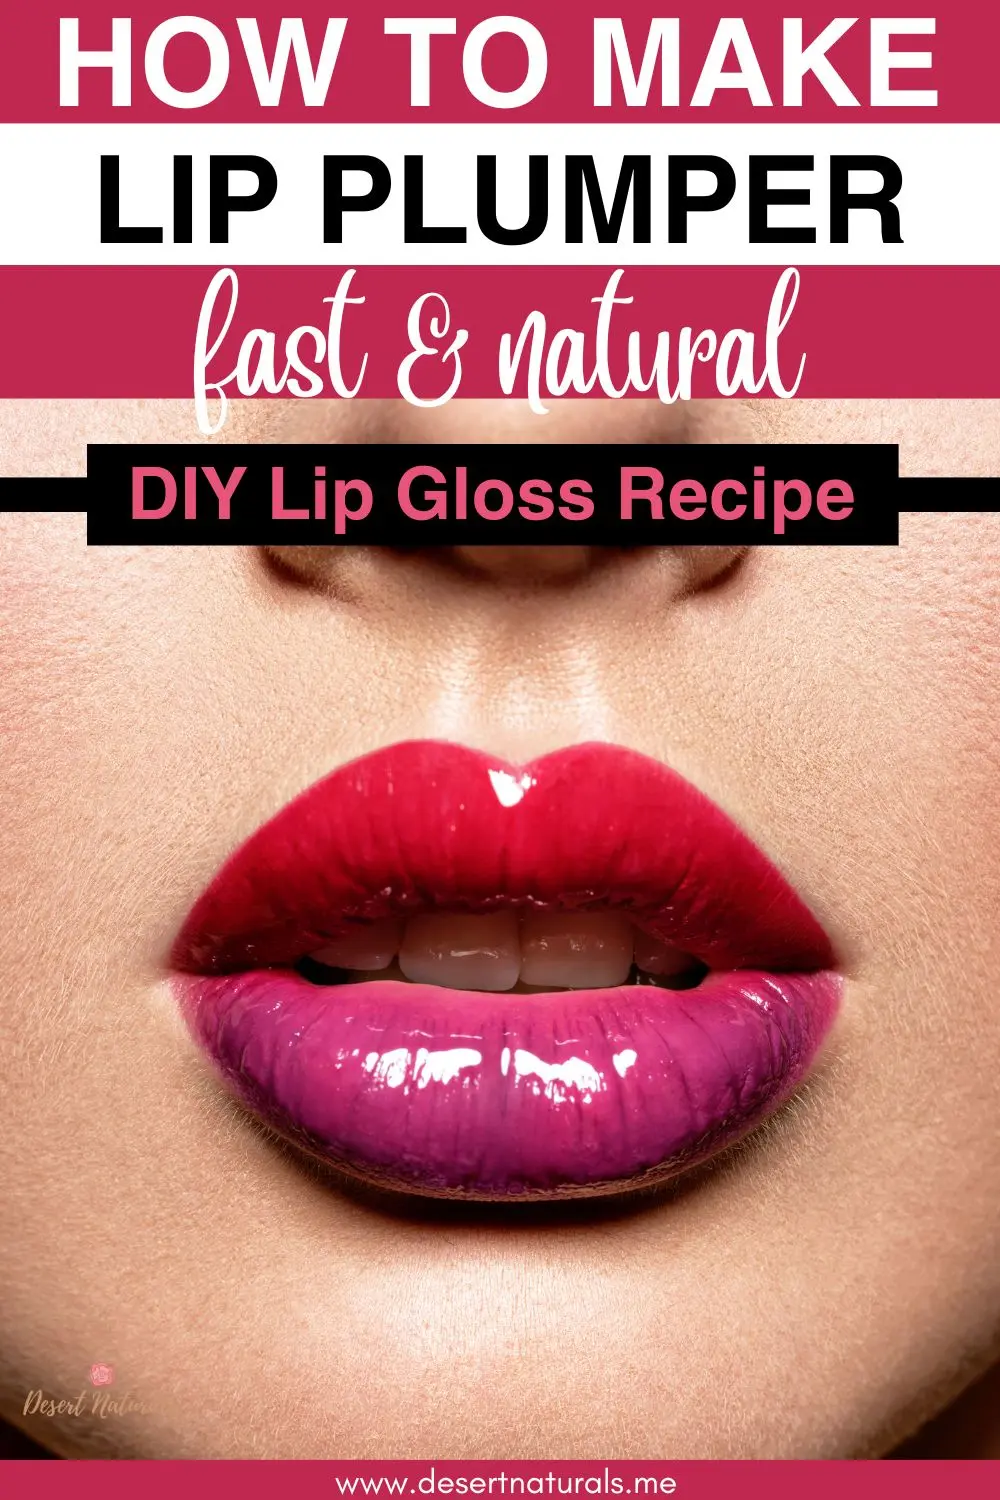 What Essential Oils Are Safe For Lips